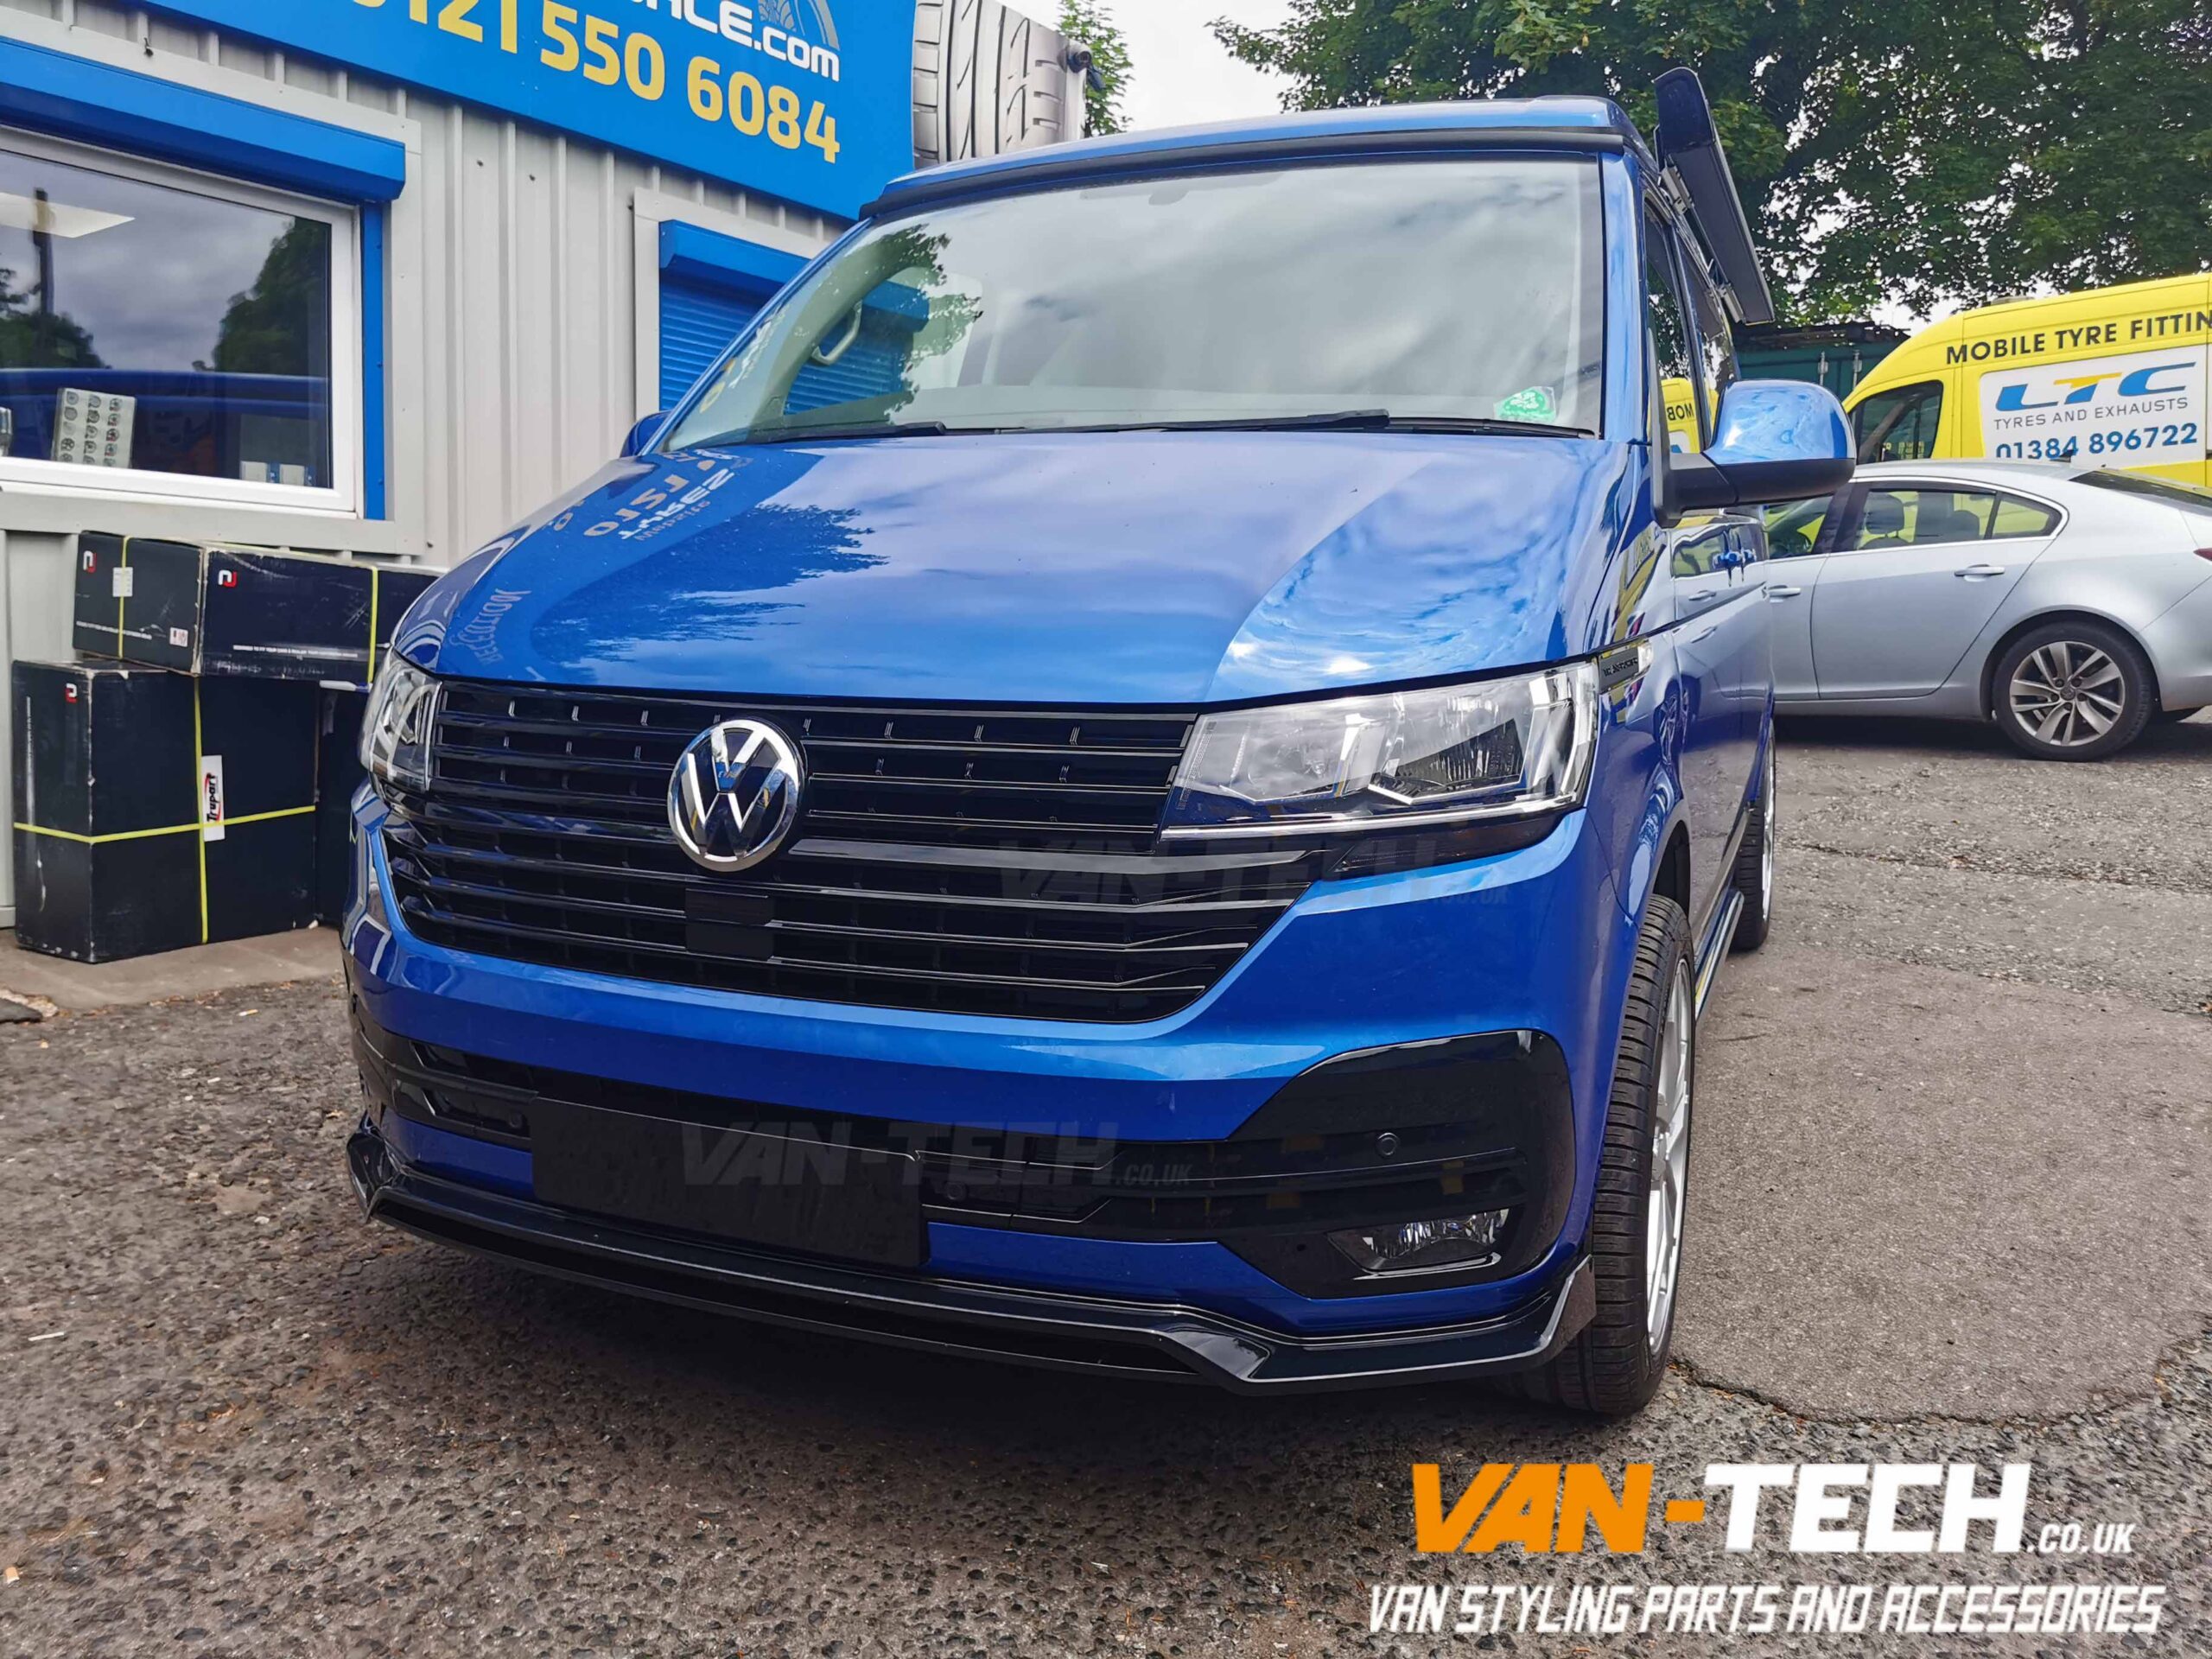 VW Transporter T6.1 Front Styling Parts Grille, Lower Splitter and Side Bars